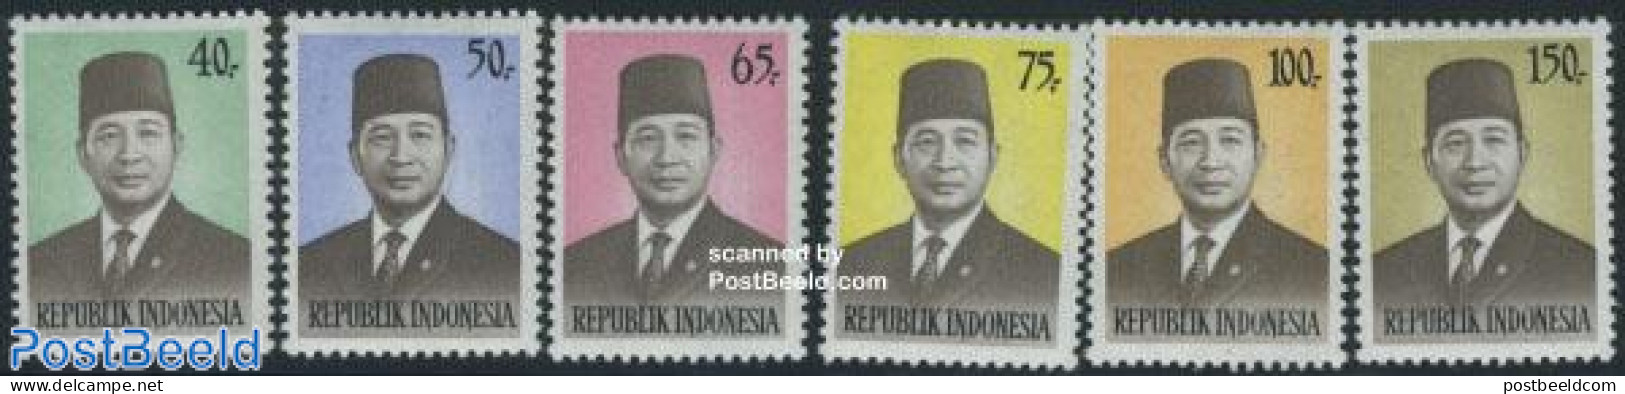 Indonesia 1974 Definitives 6v, Mint NH - Indonesia